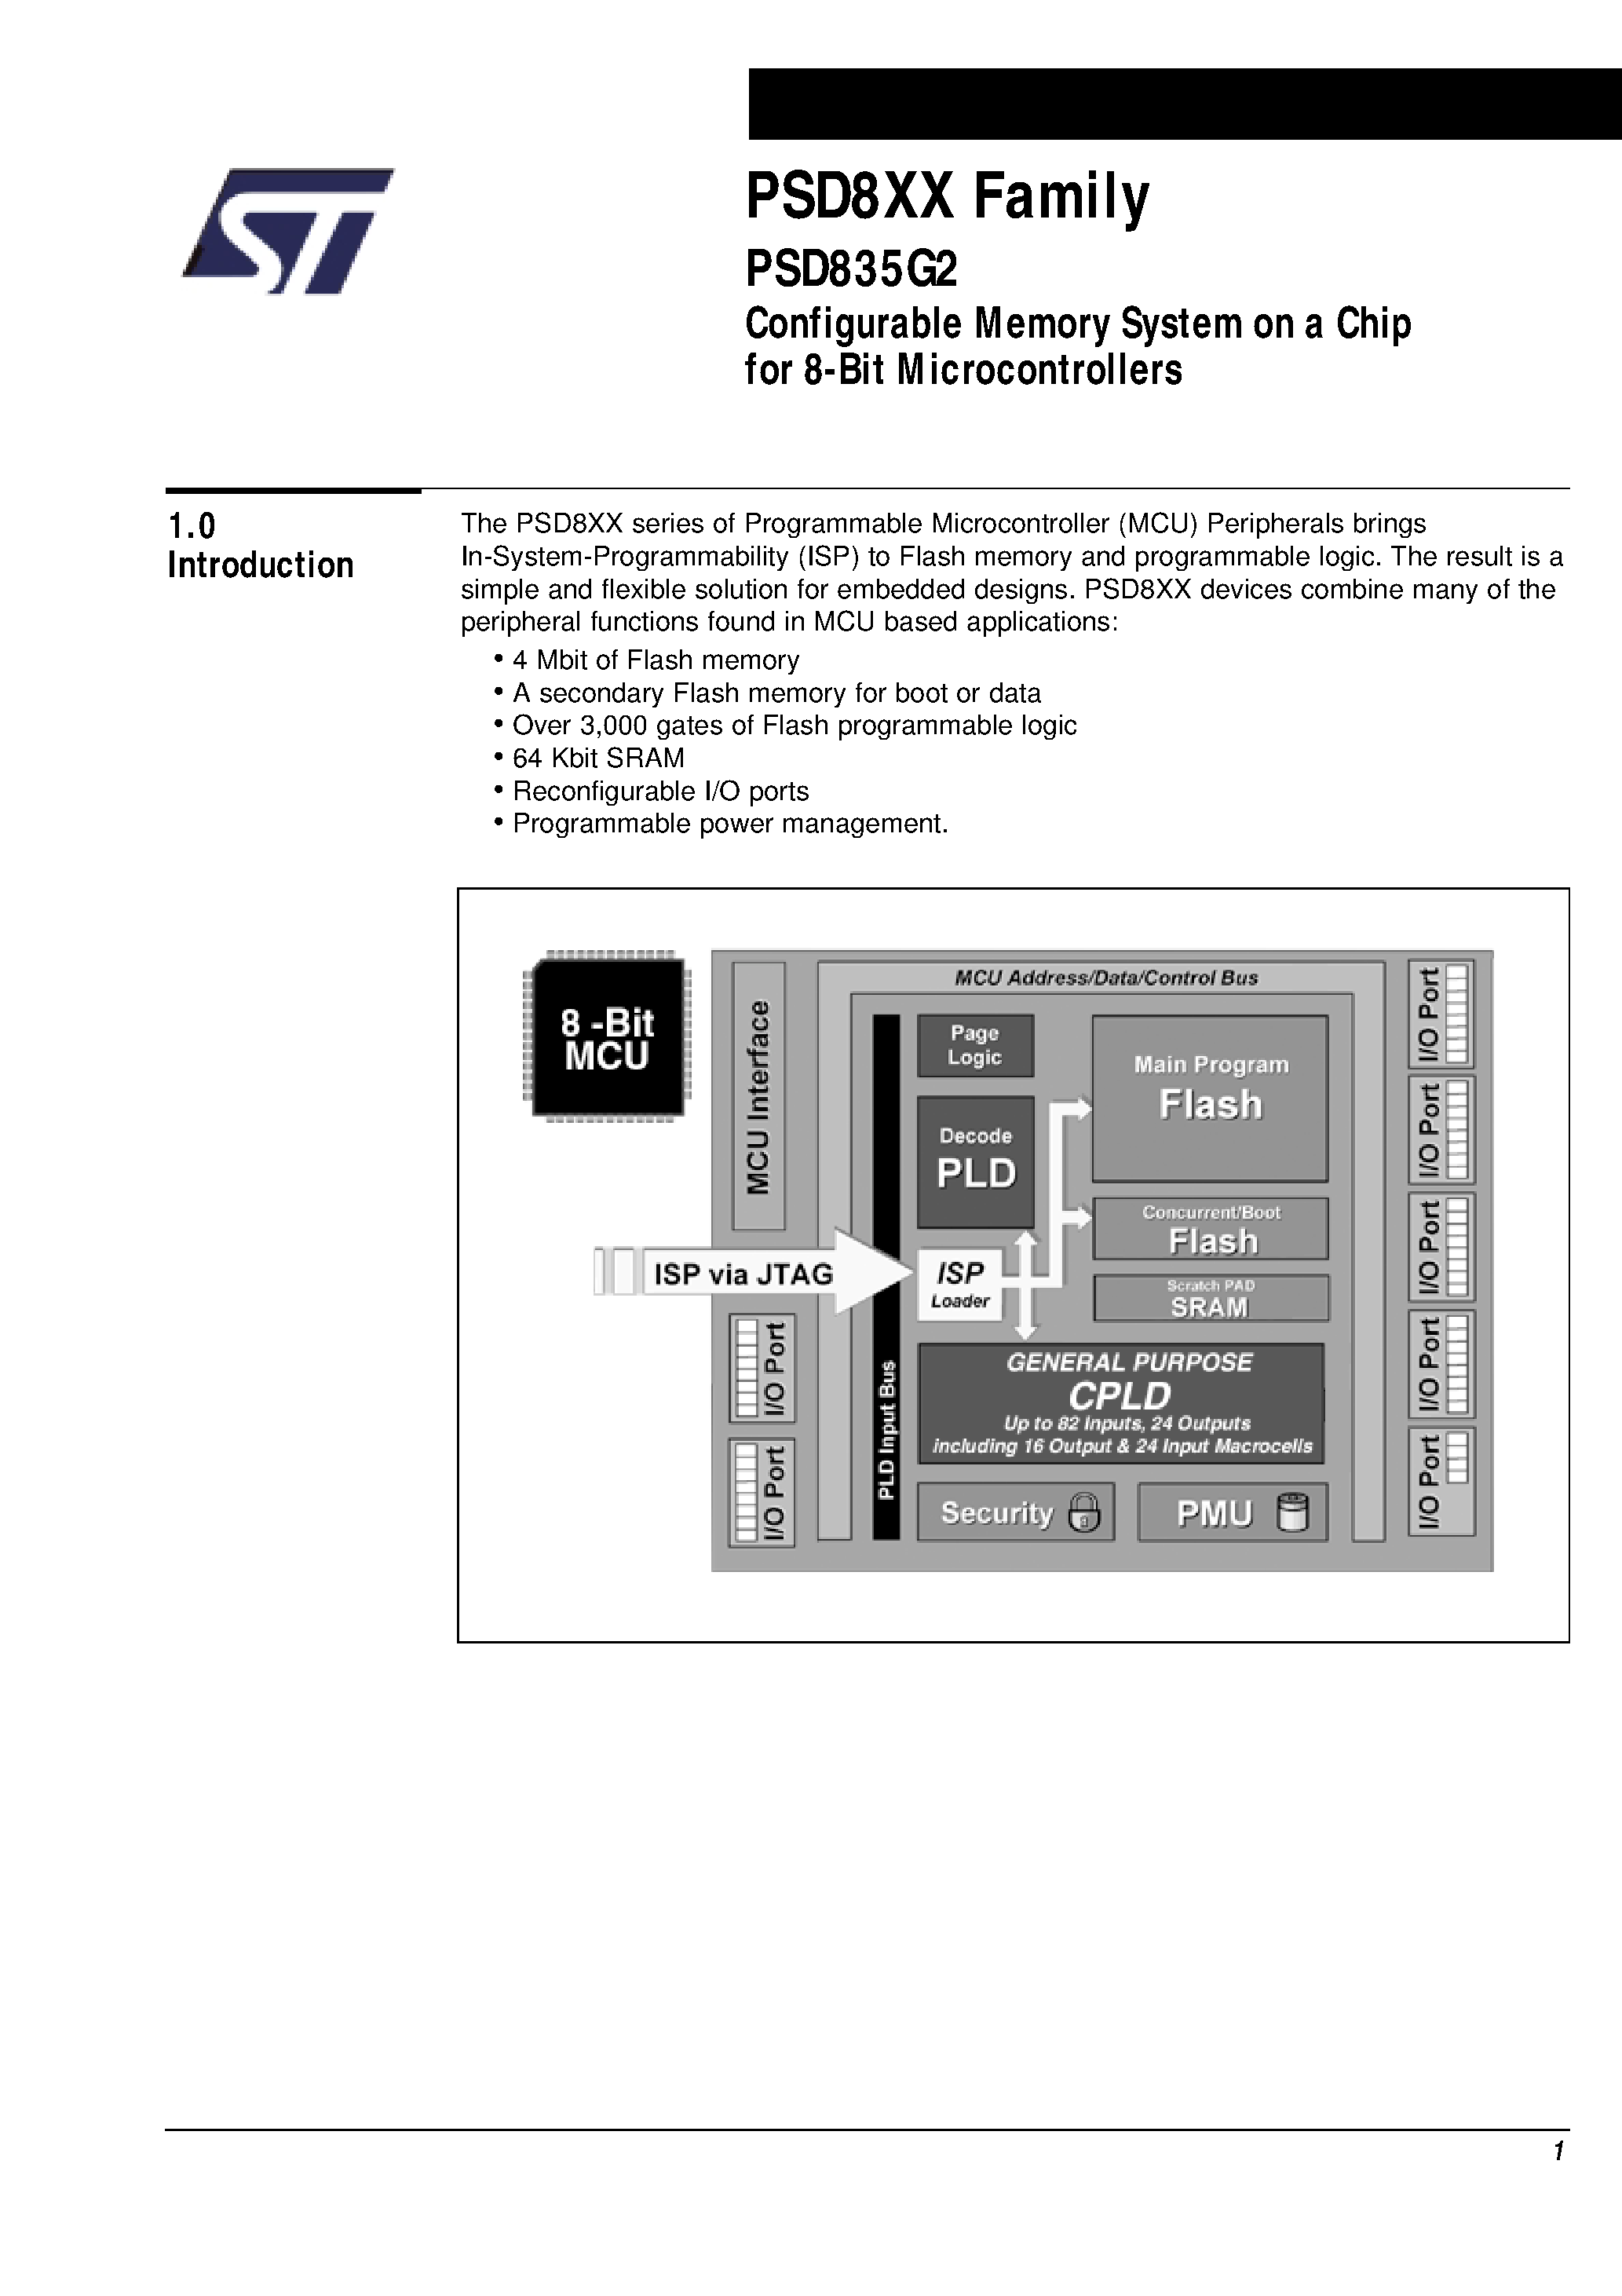 Datasheet PSD835F1-A-12B81I - Configurable Memory System on a Chip for 8-Bit Microcontrollers page 2